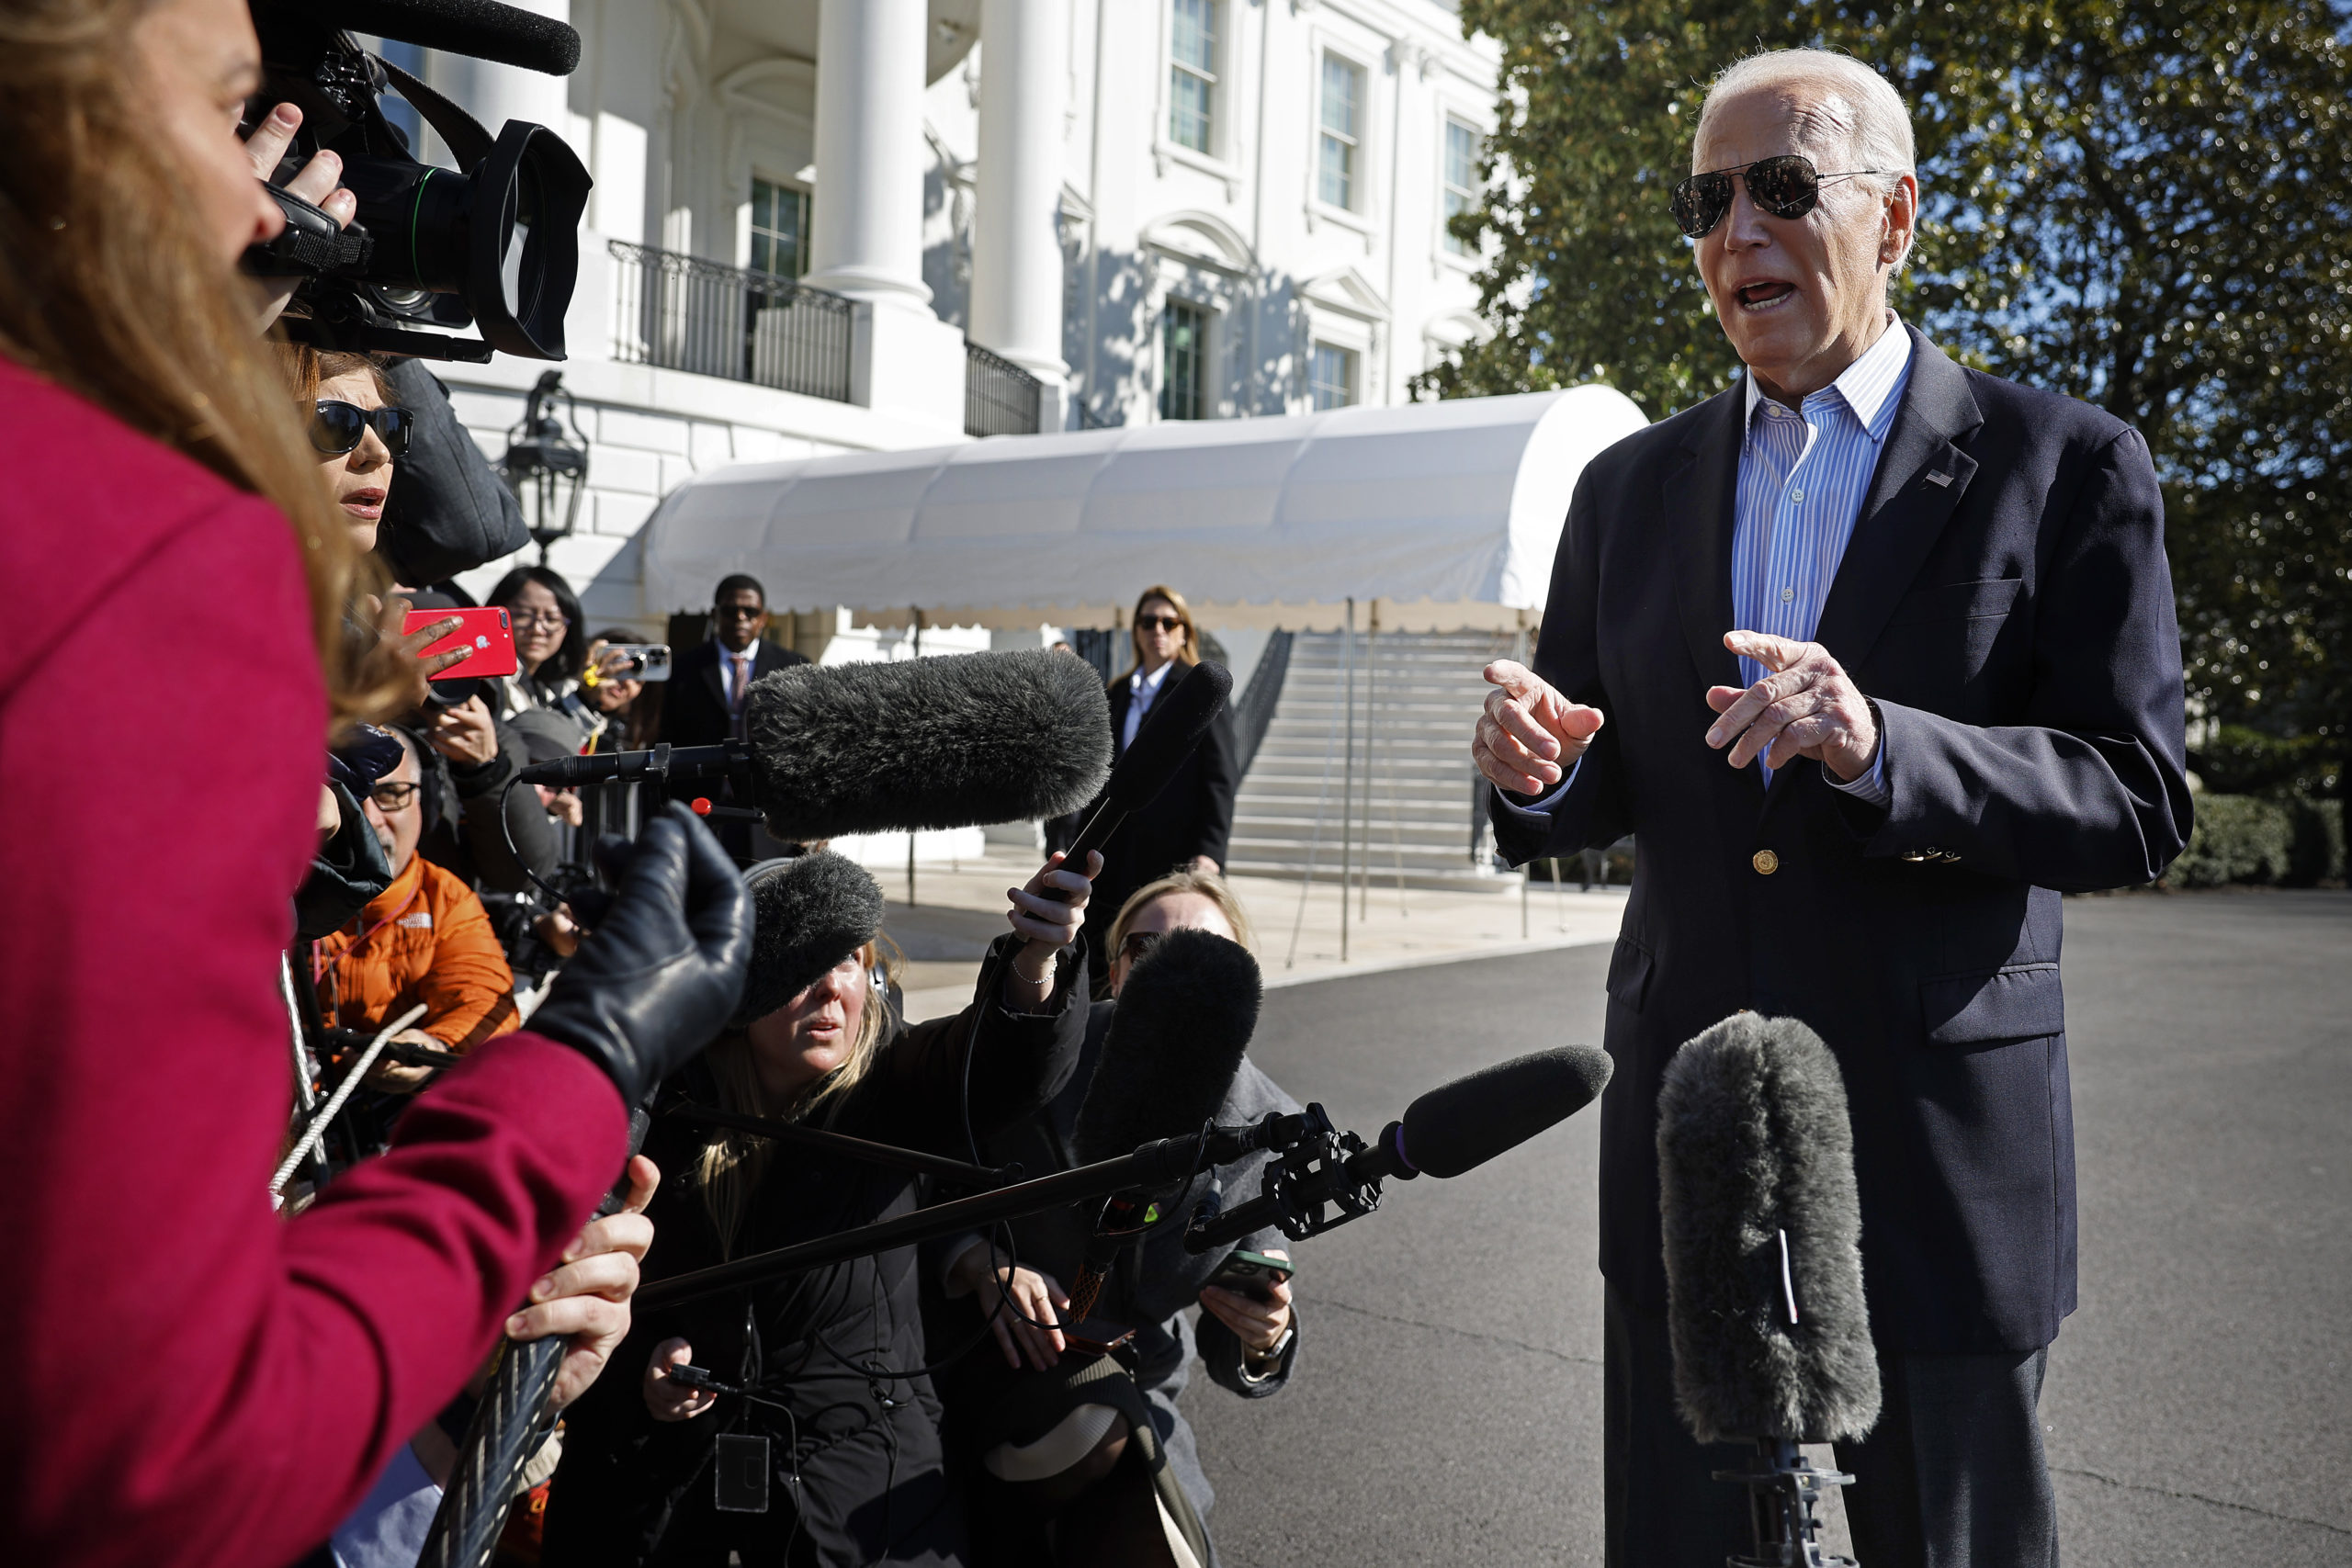  U.S. President Joe Biden speaks briefly with reporters before boarding the Marine One presidential helicopter and departing the White House on February 29, 2024 in Washington, DC. In the throes of a re-election campaign, Biden is traveling to Brownsville, Texas, near the U.S.-Mexico border on the same day that Republican rival and former President Donald Trump is scheduled to visit the border. (Photo by Chip Somodevilla/Getty Images)